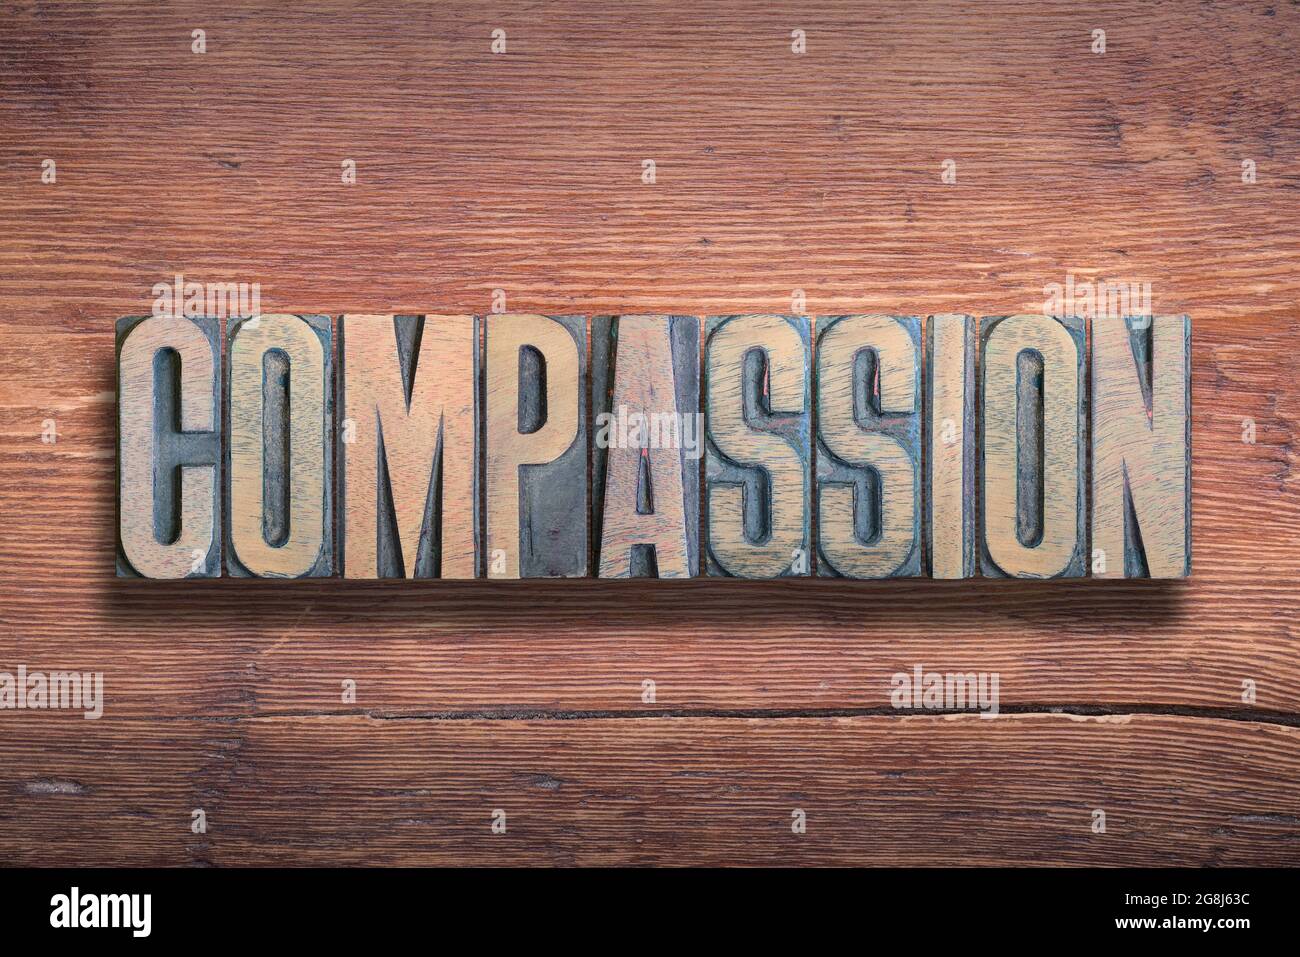 compassion word combined on vintage varnished wooden surface Stock Photo